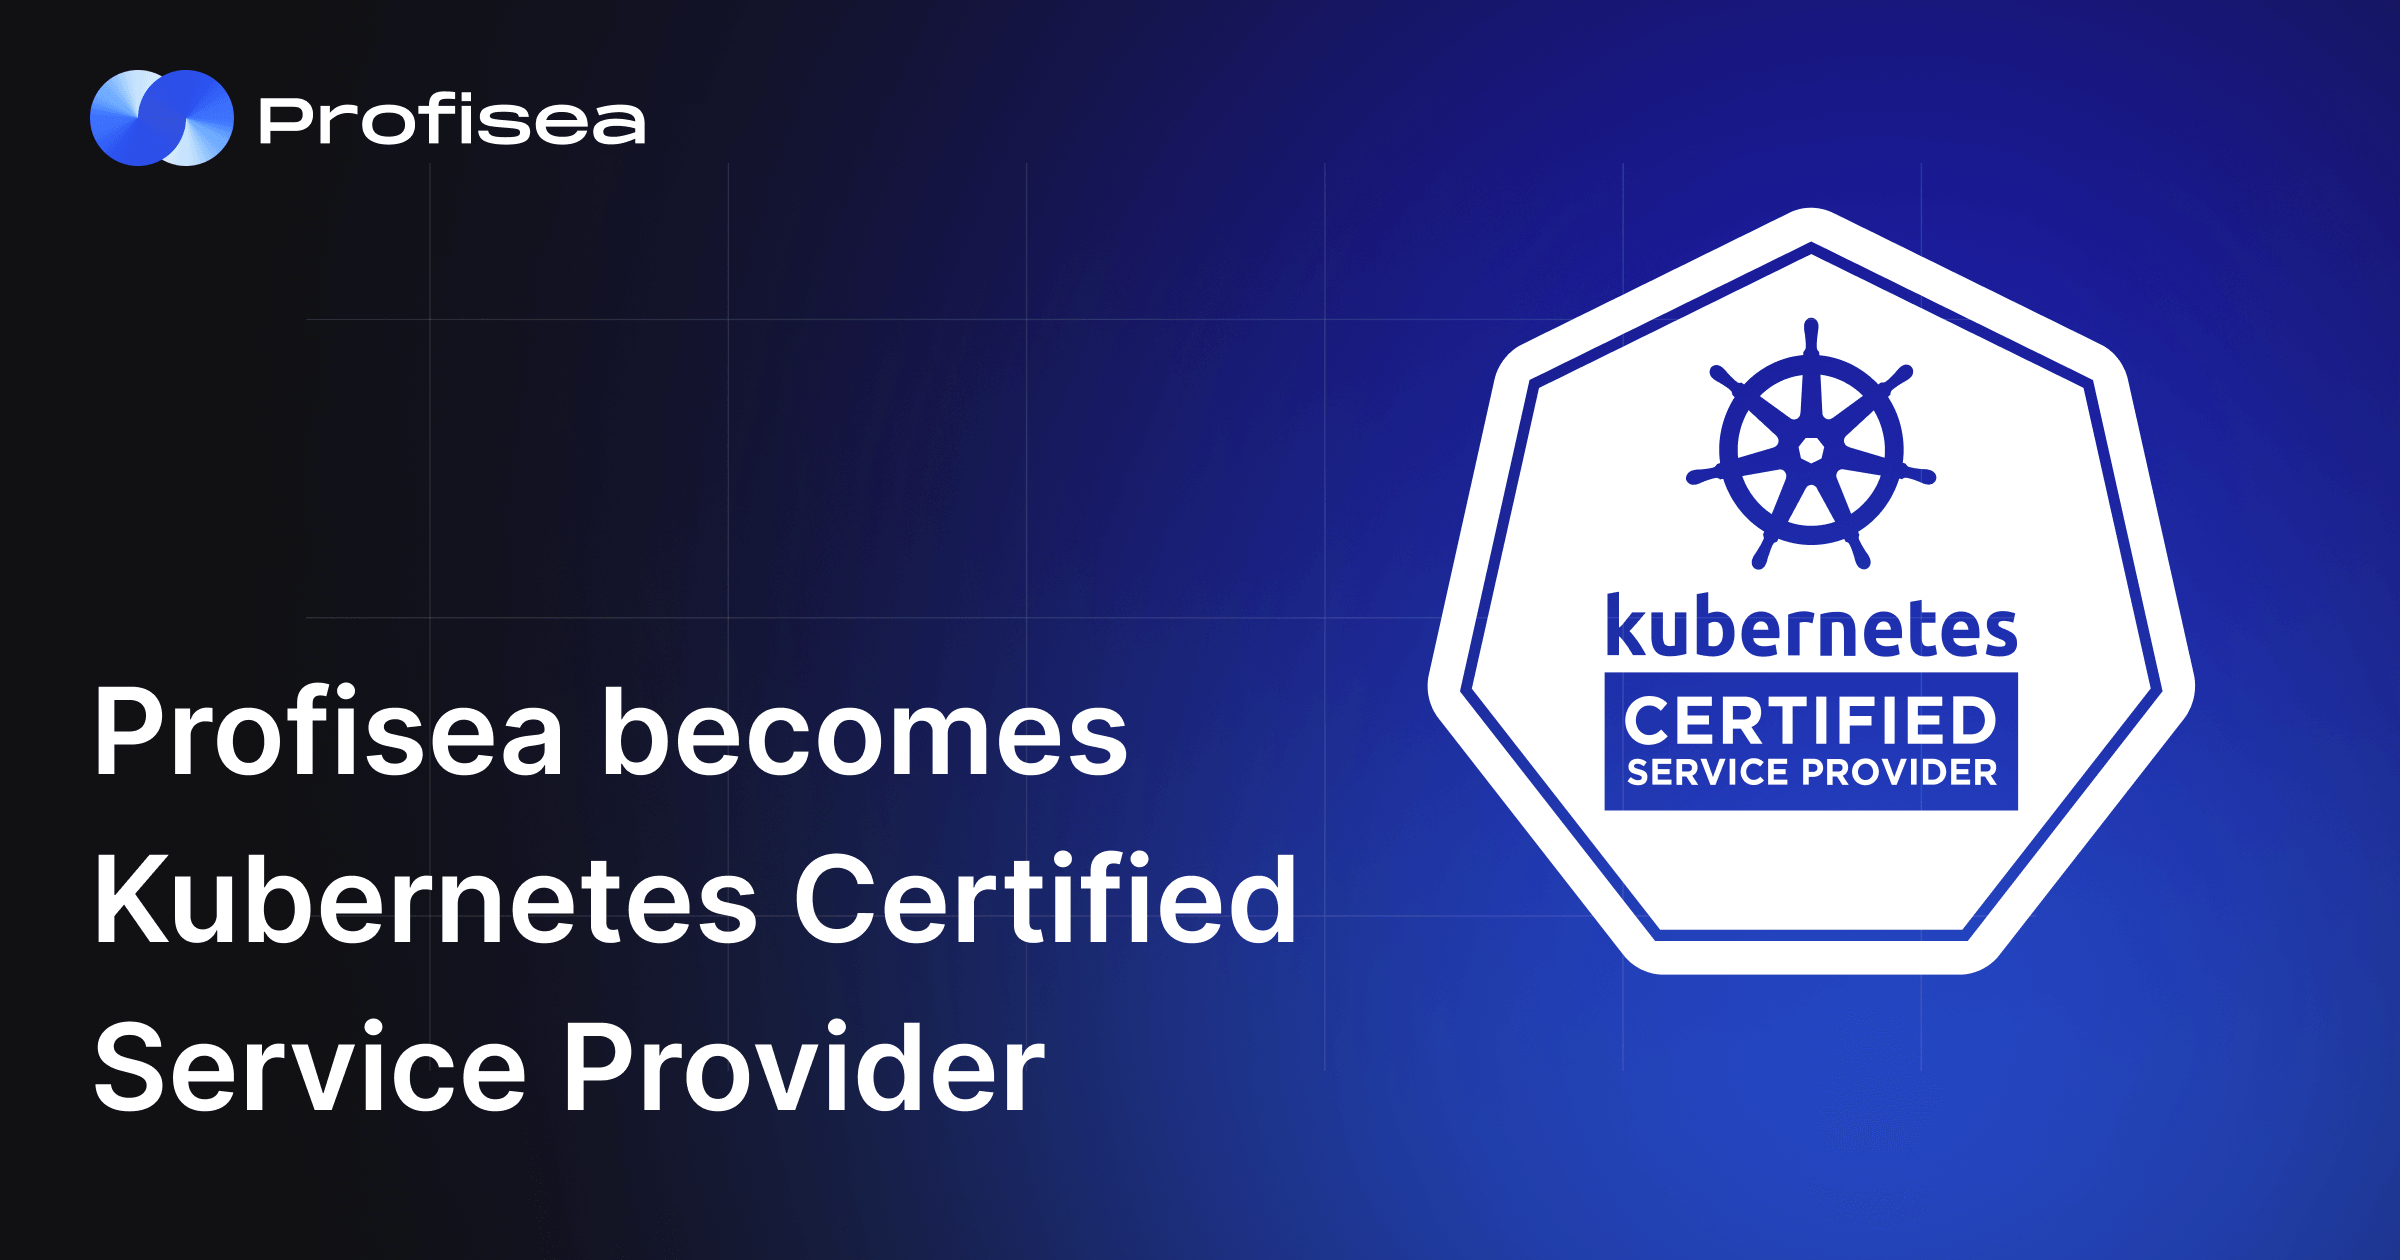 Profisea is now a Kubernetes Certified Service Provider  